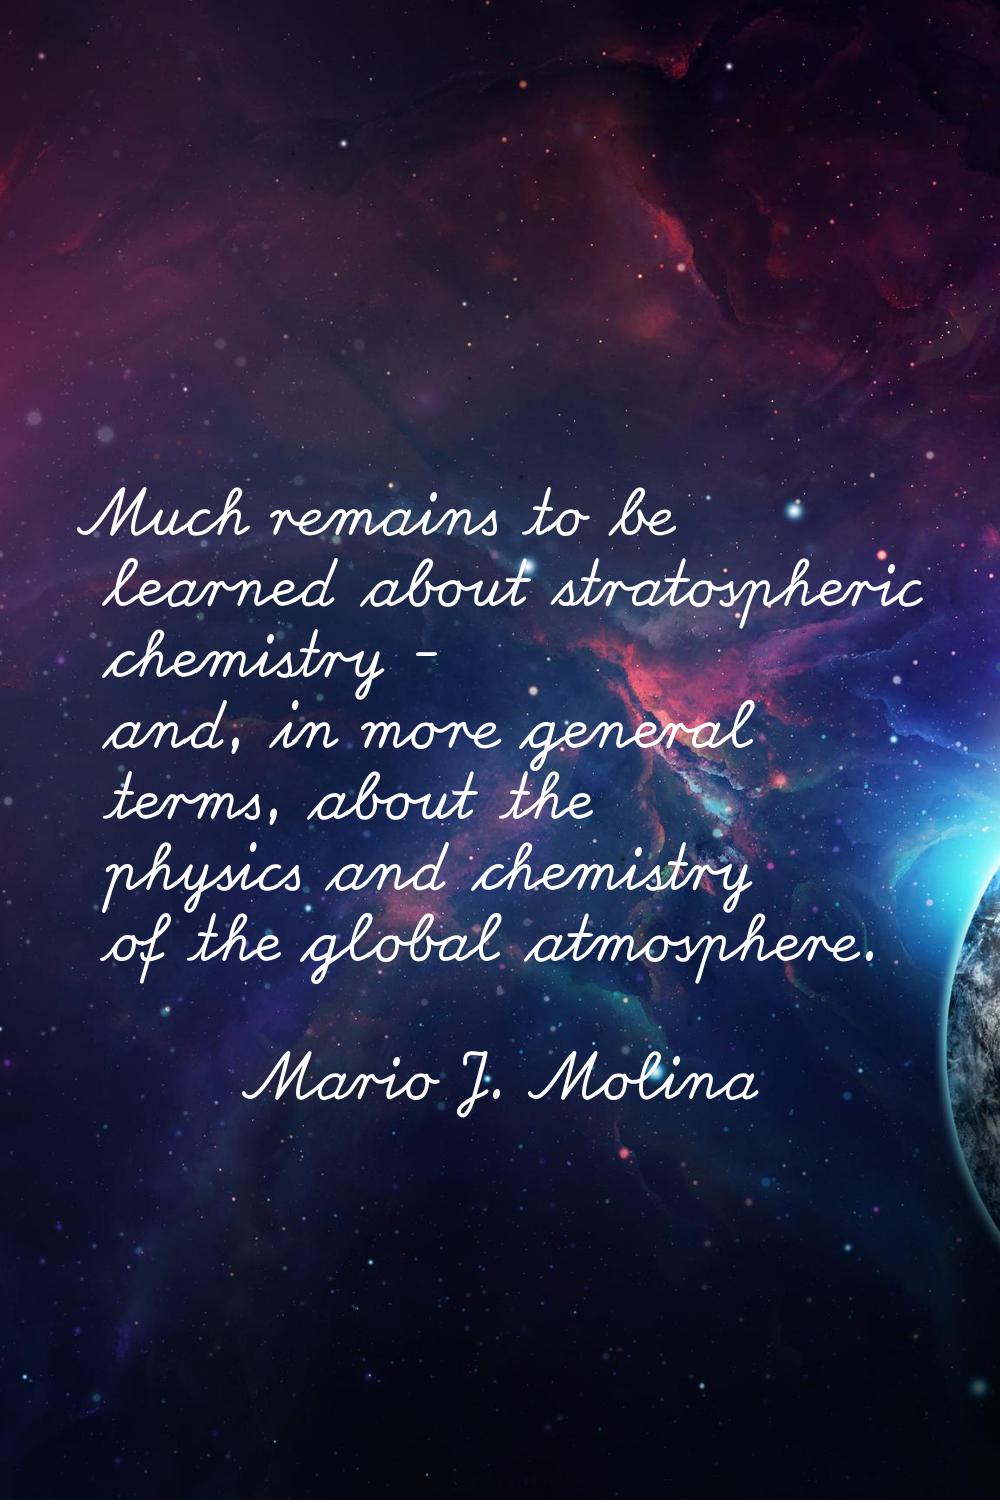 Much remains to be learned about stratospheric chemistry - and, in more general terms, about the ph